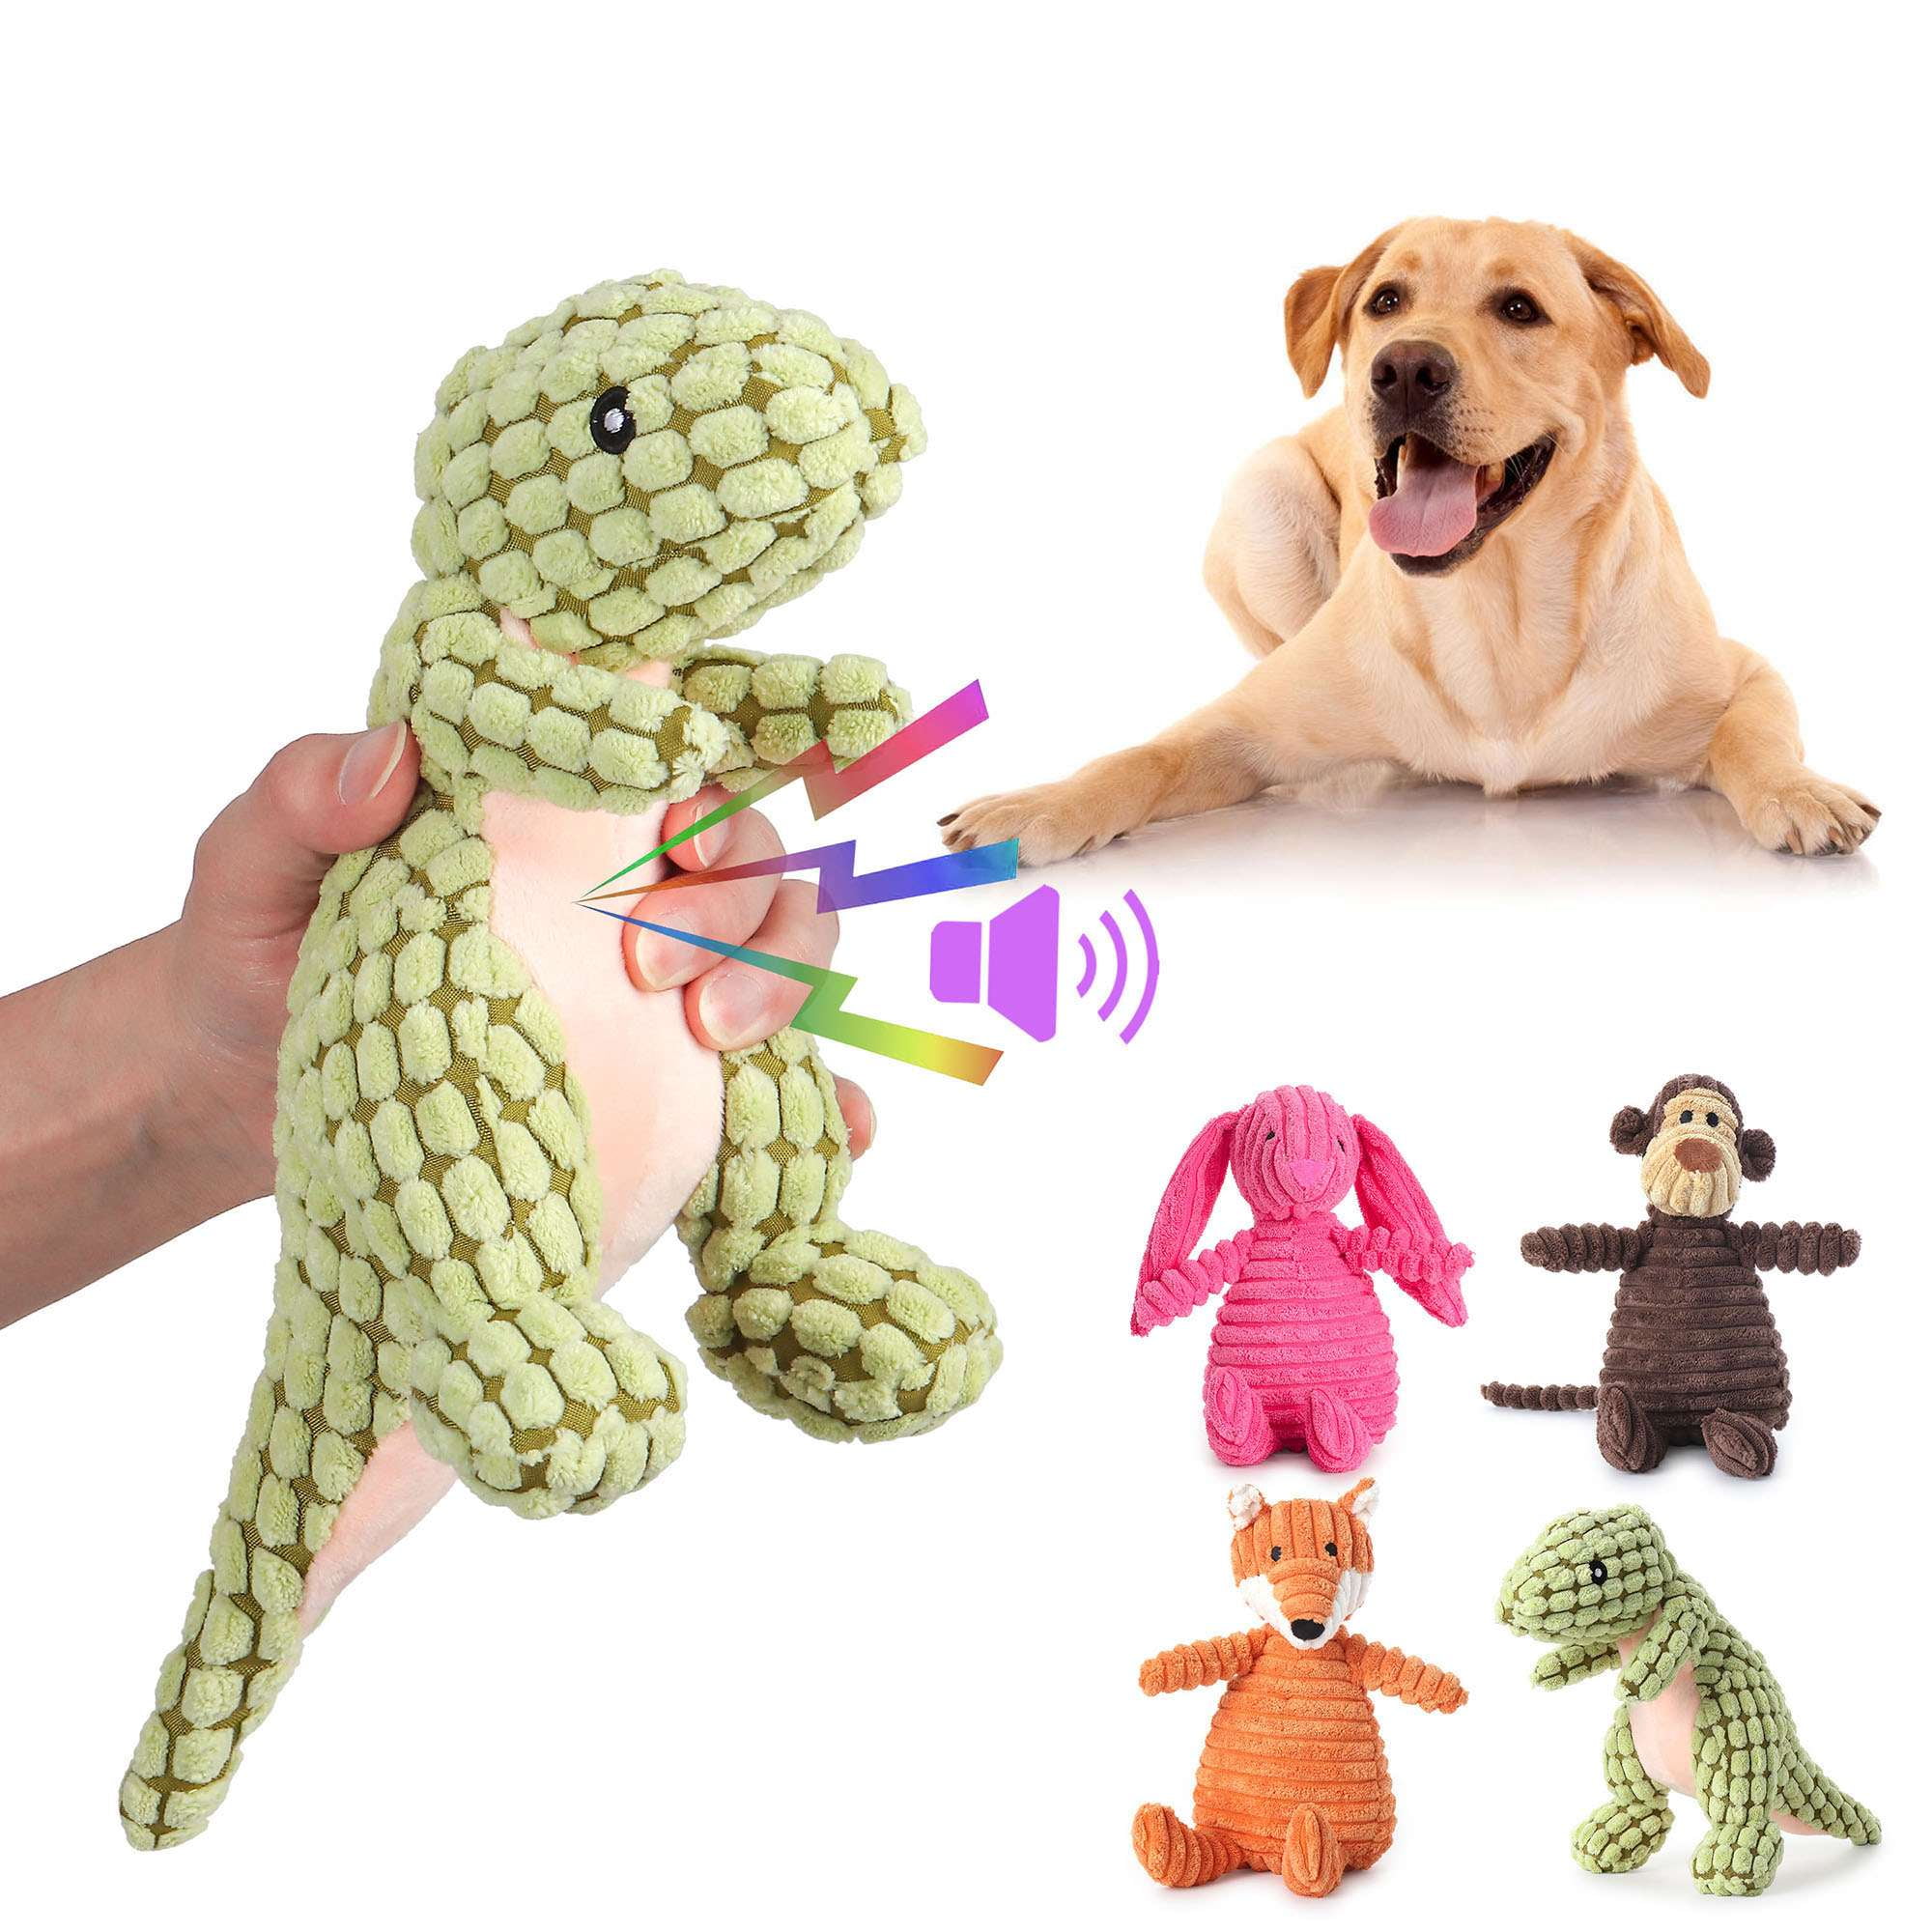 Shenmeida Dog Toy Squeaky Stuffed Dog Toys for Boredom %26 Stimulating  Play,Durable Pizza Shape Dog Stuffed Animals Chew Toy for Small Medium Dogs  